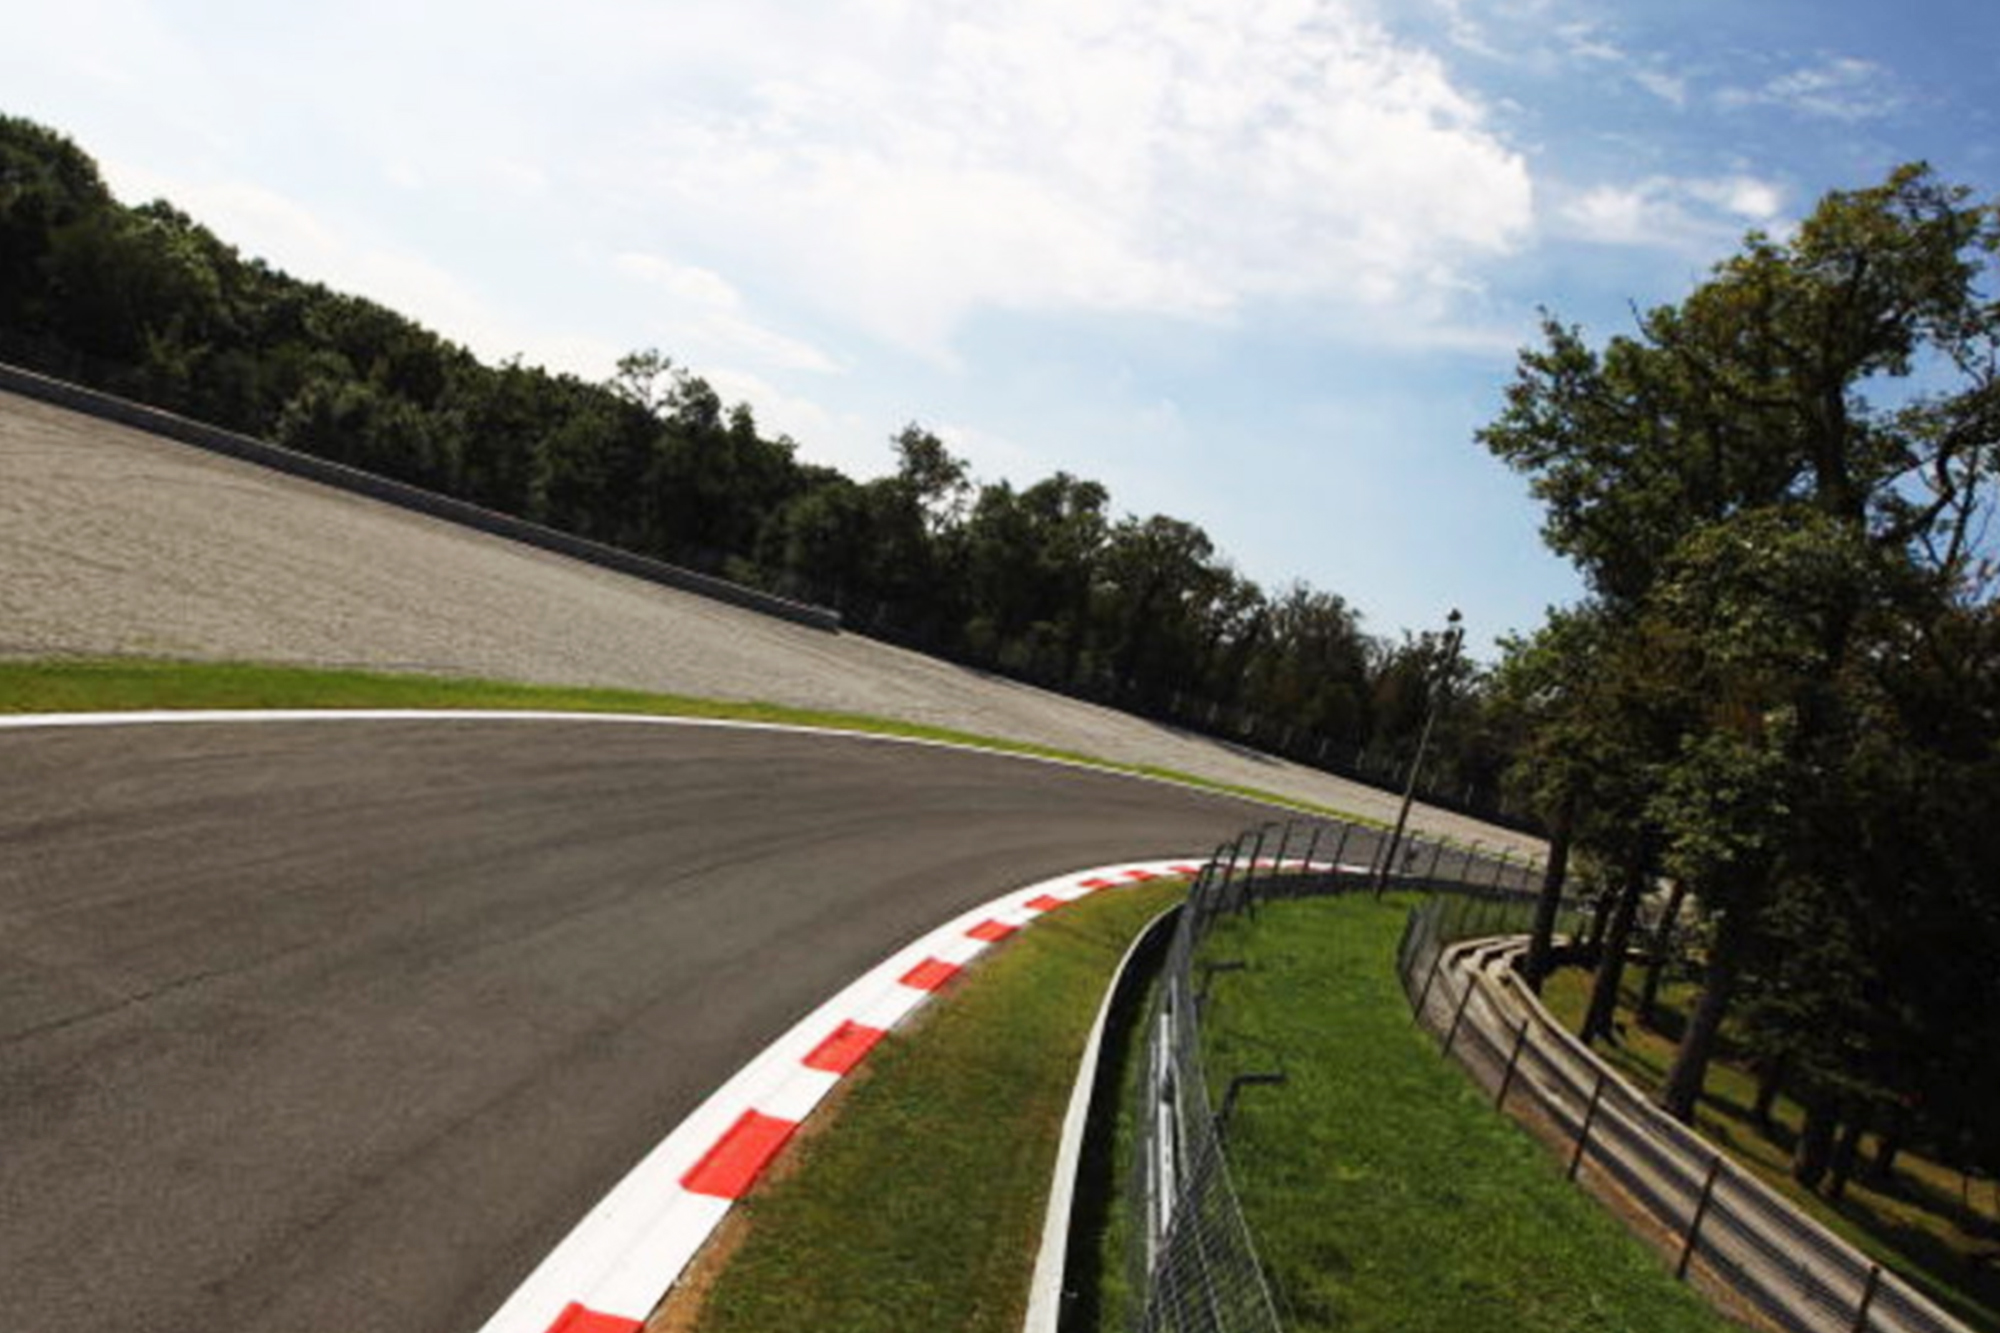 The Parabolica bend at Monza with no vehicles on track